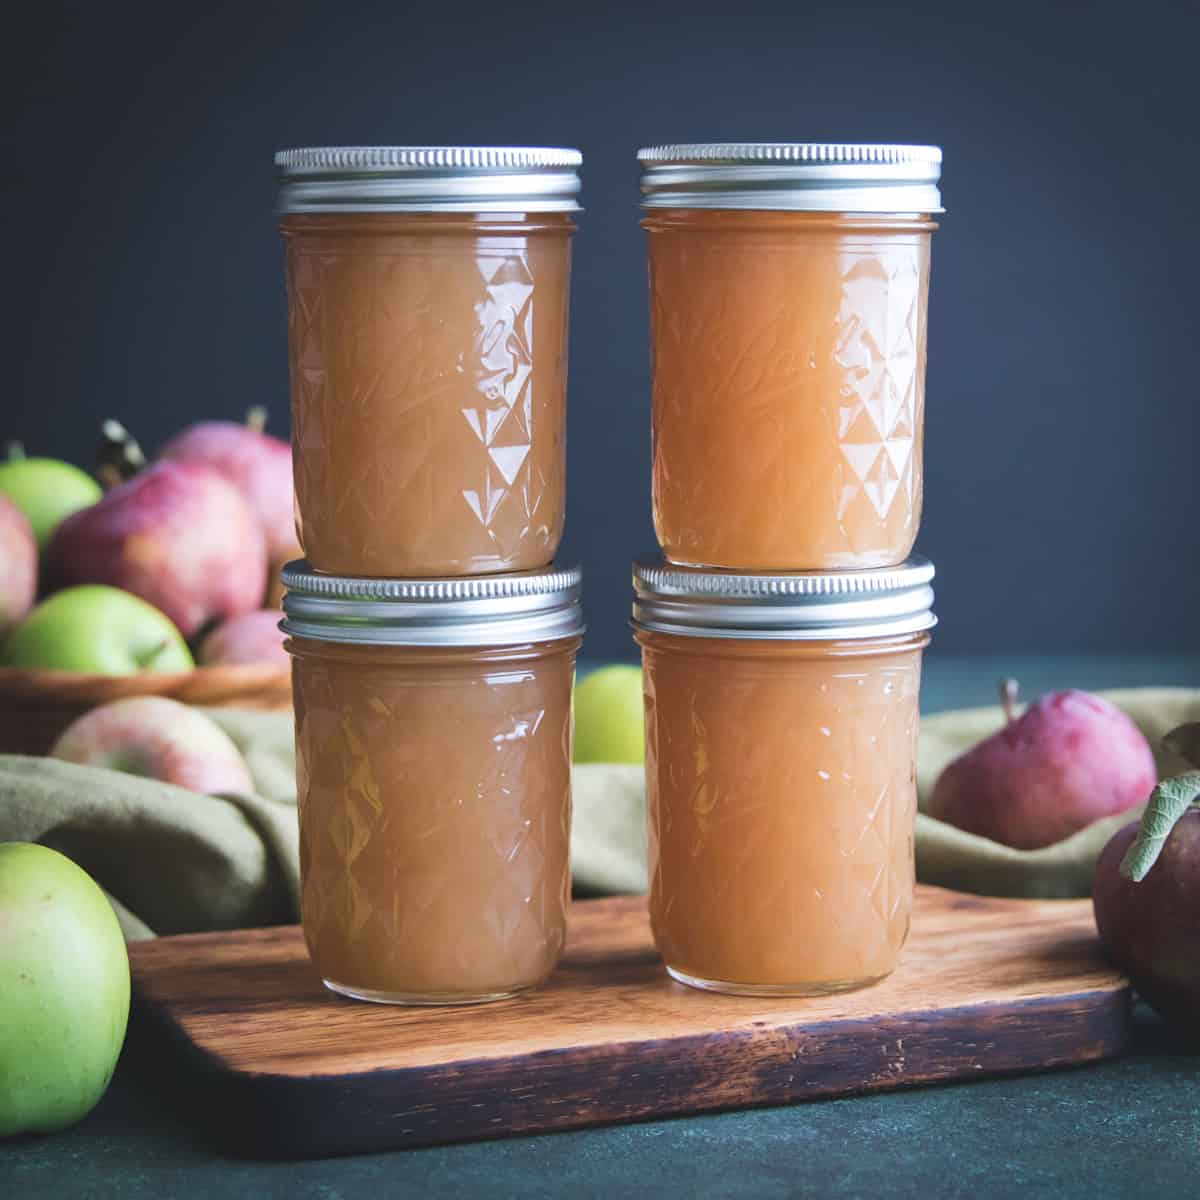 two stacks of two jars of homemade apple jelly